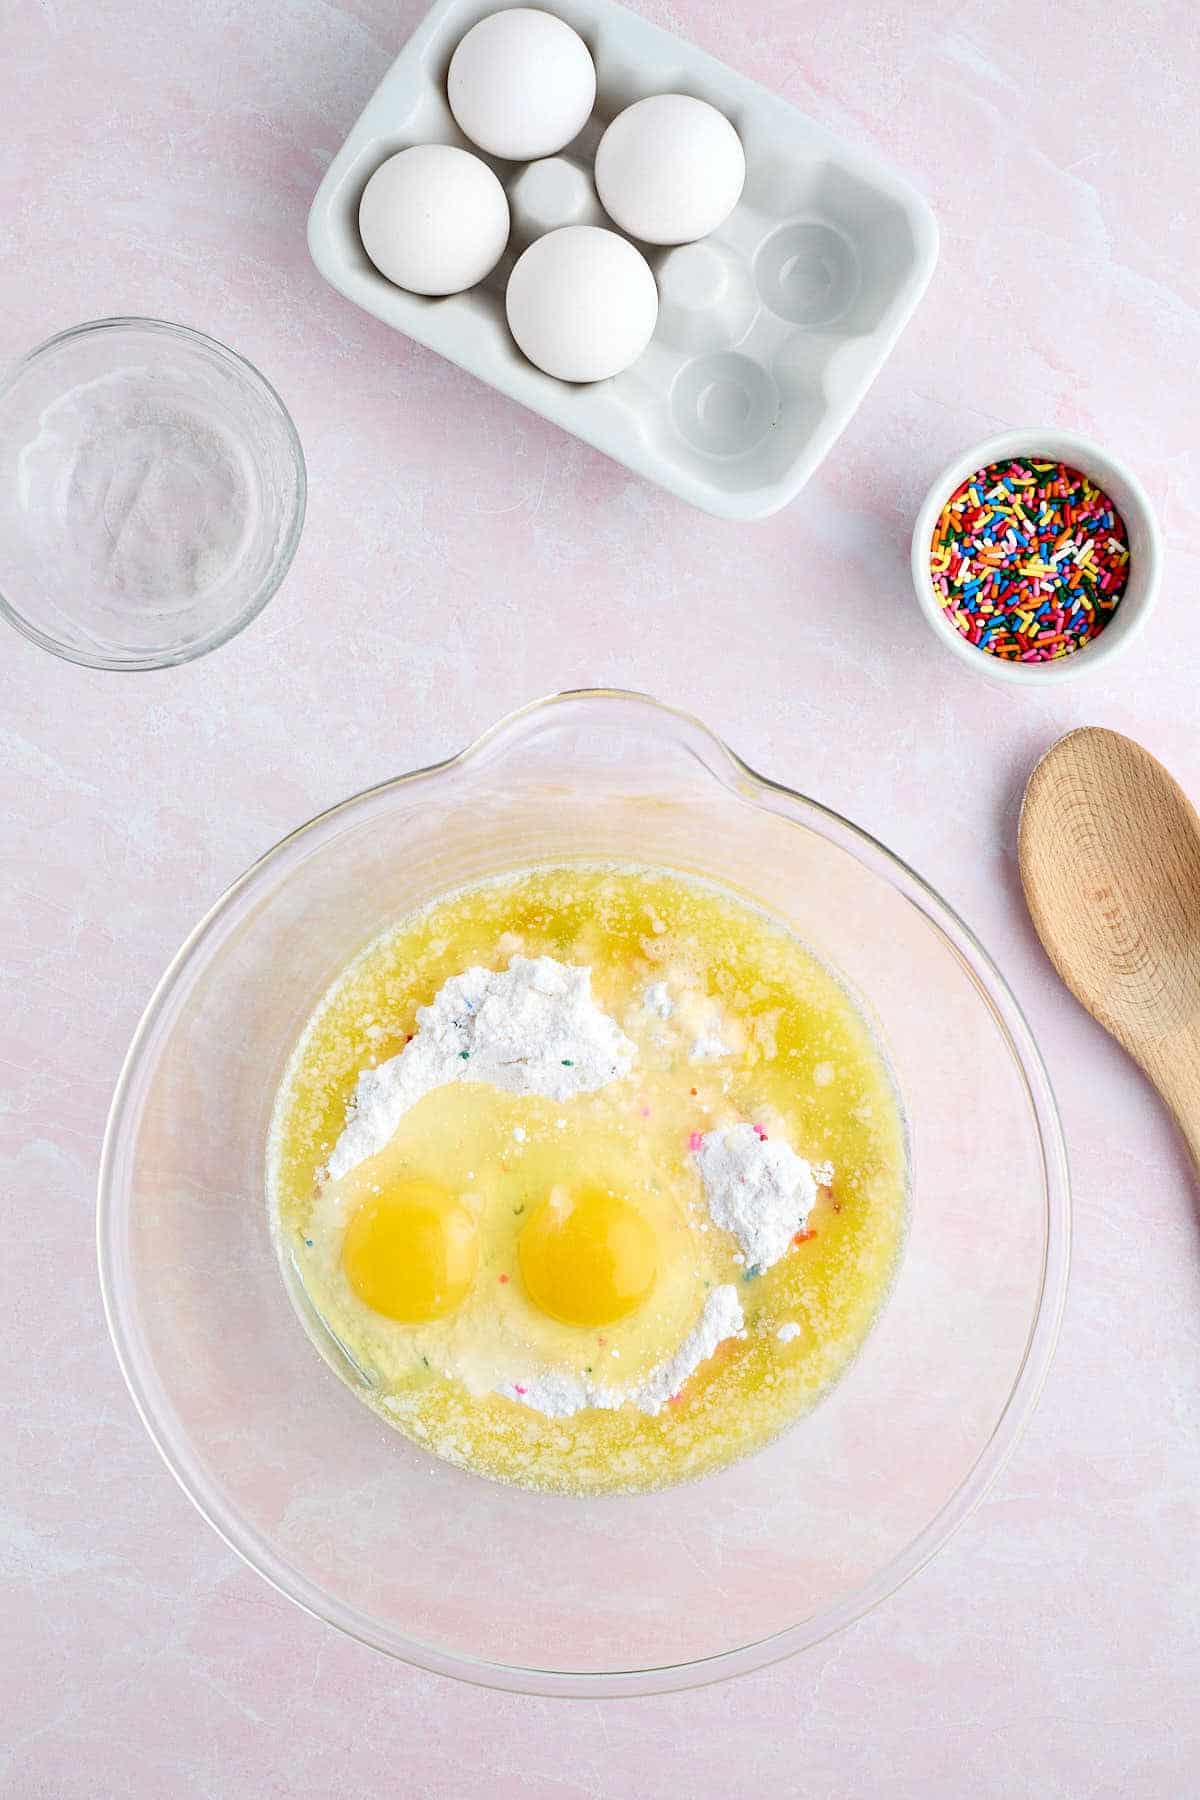 Melted butter and eggs added to bowl of Funfetti cake mix for cookies.